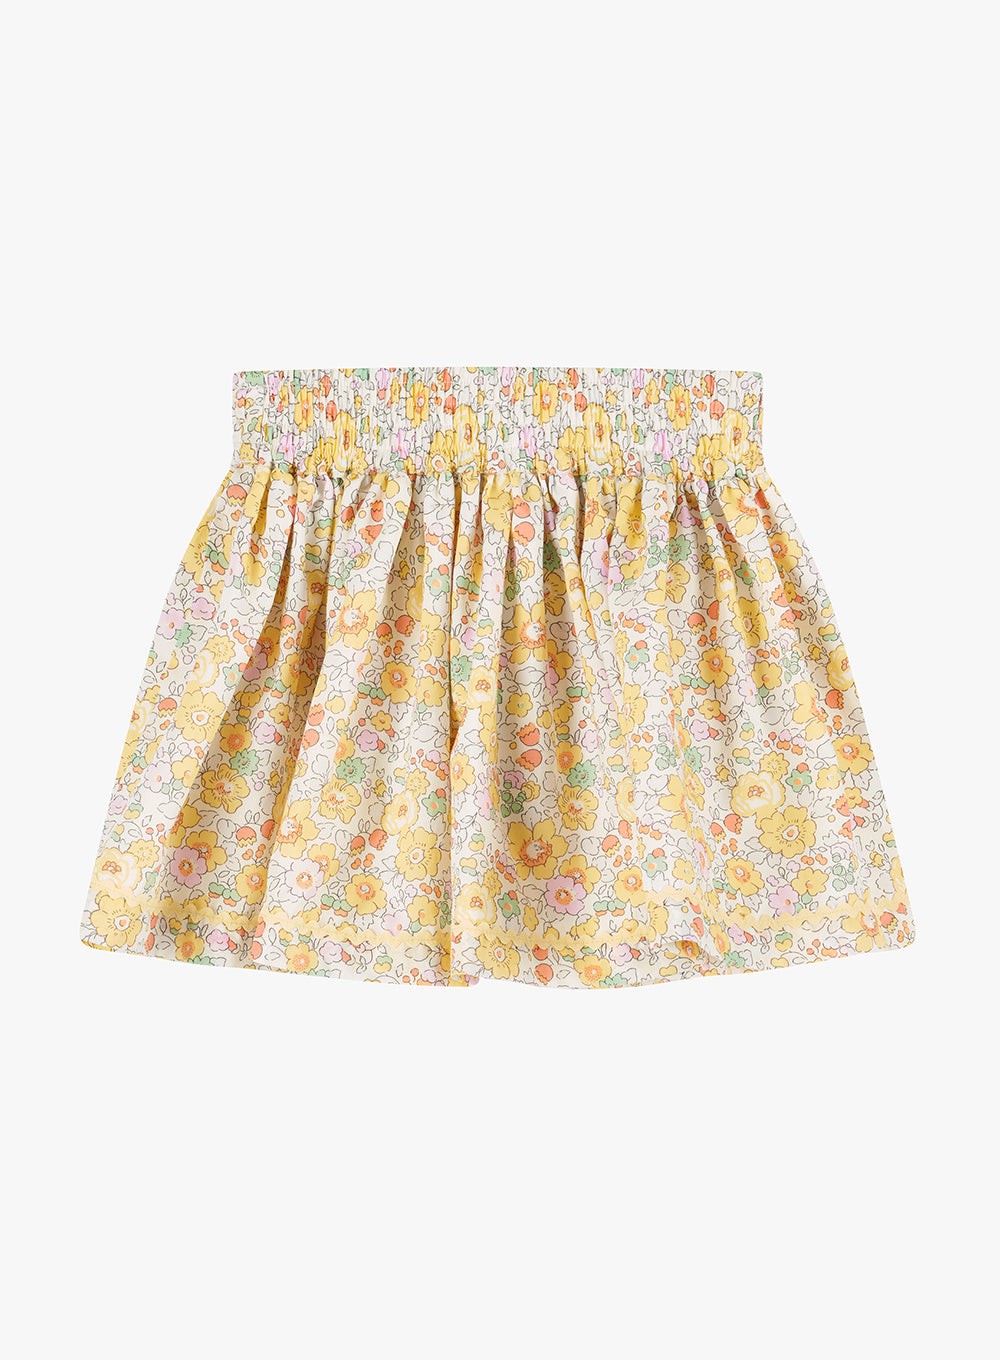 Lily Rose Skirt Bow Skirt in Buttercup Betsy